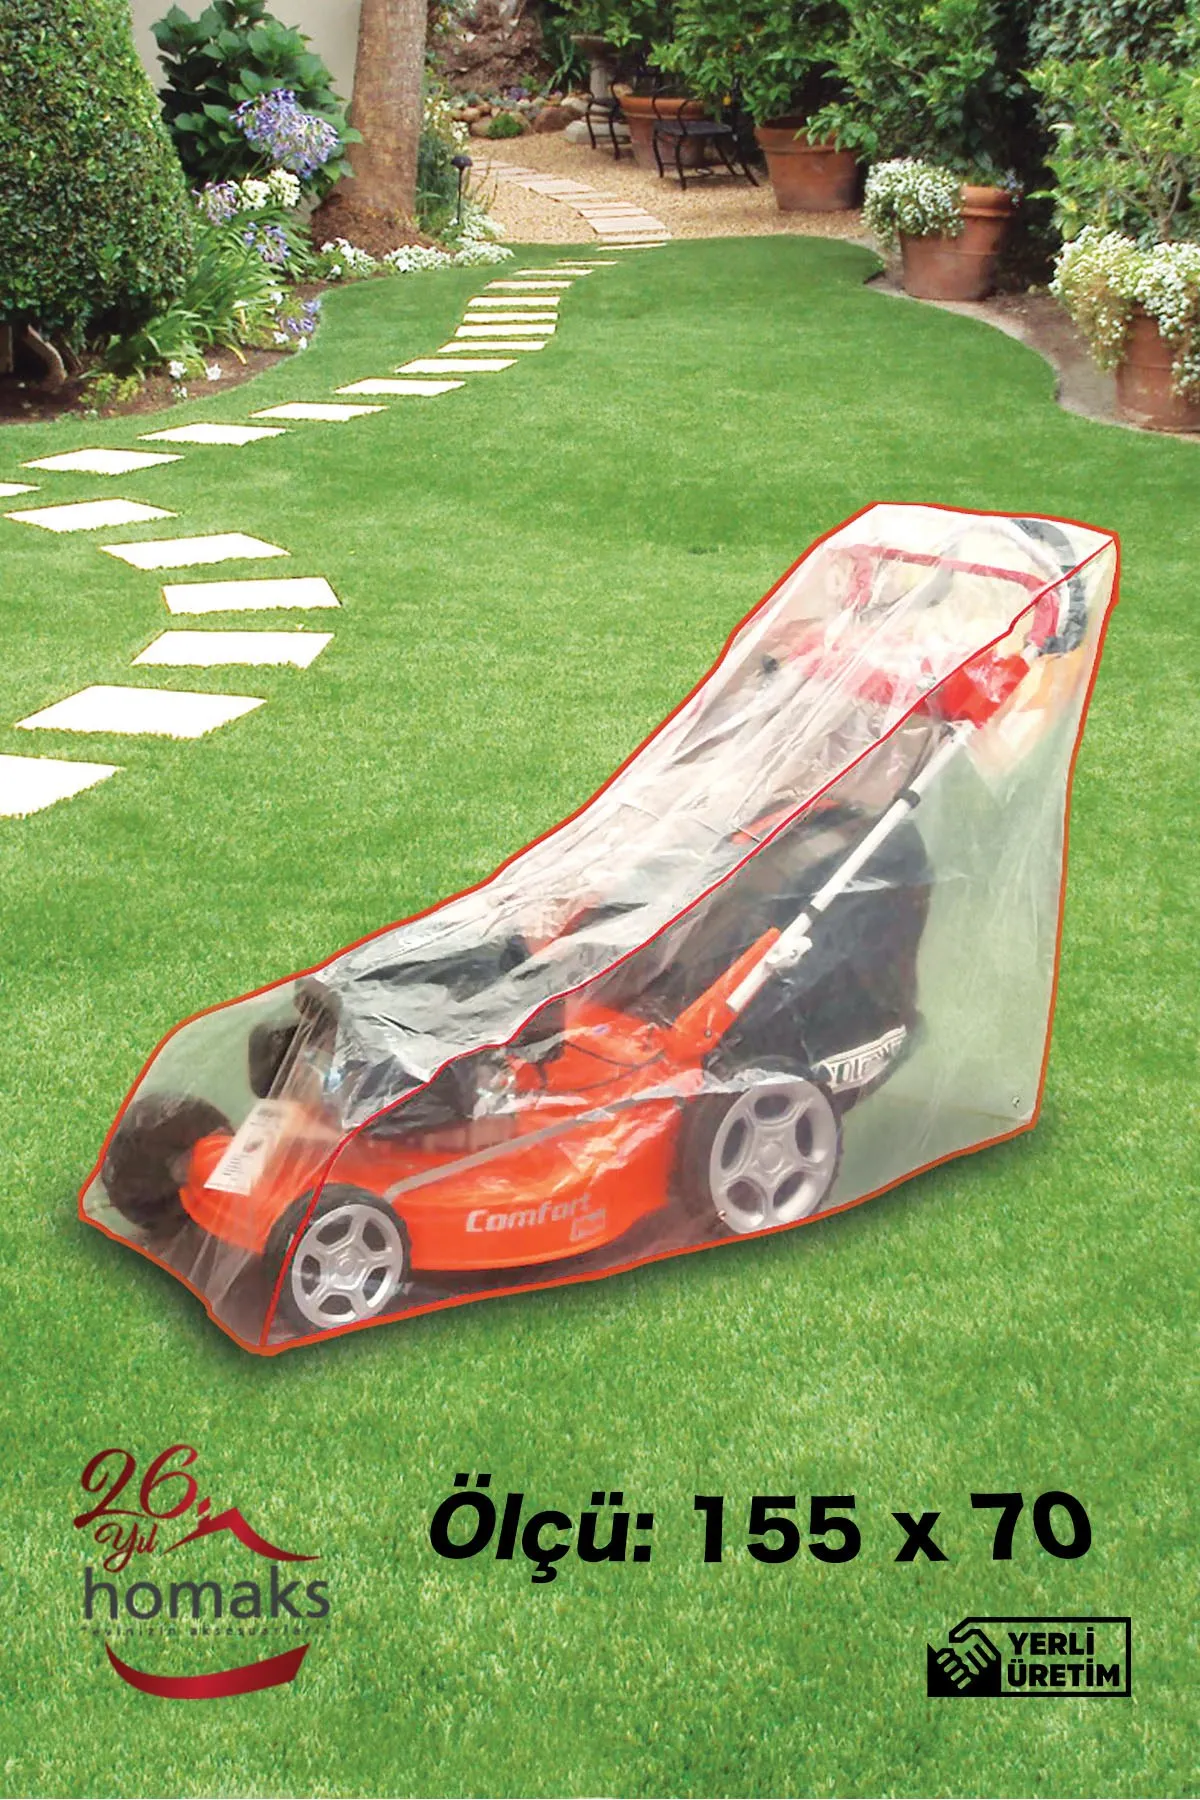 Lawn Mower Protection Cover transparent tarpaulin cover protects from durable rain and dust